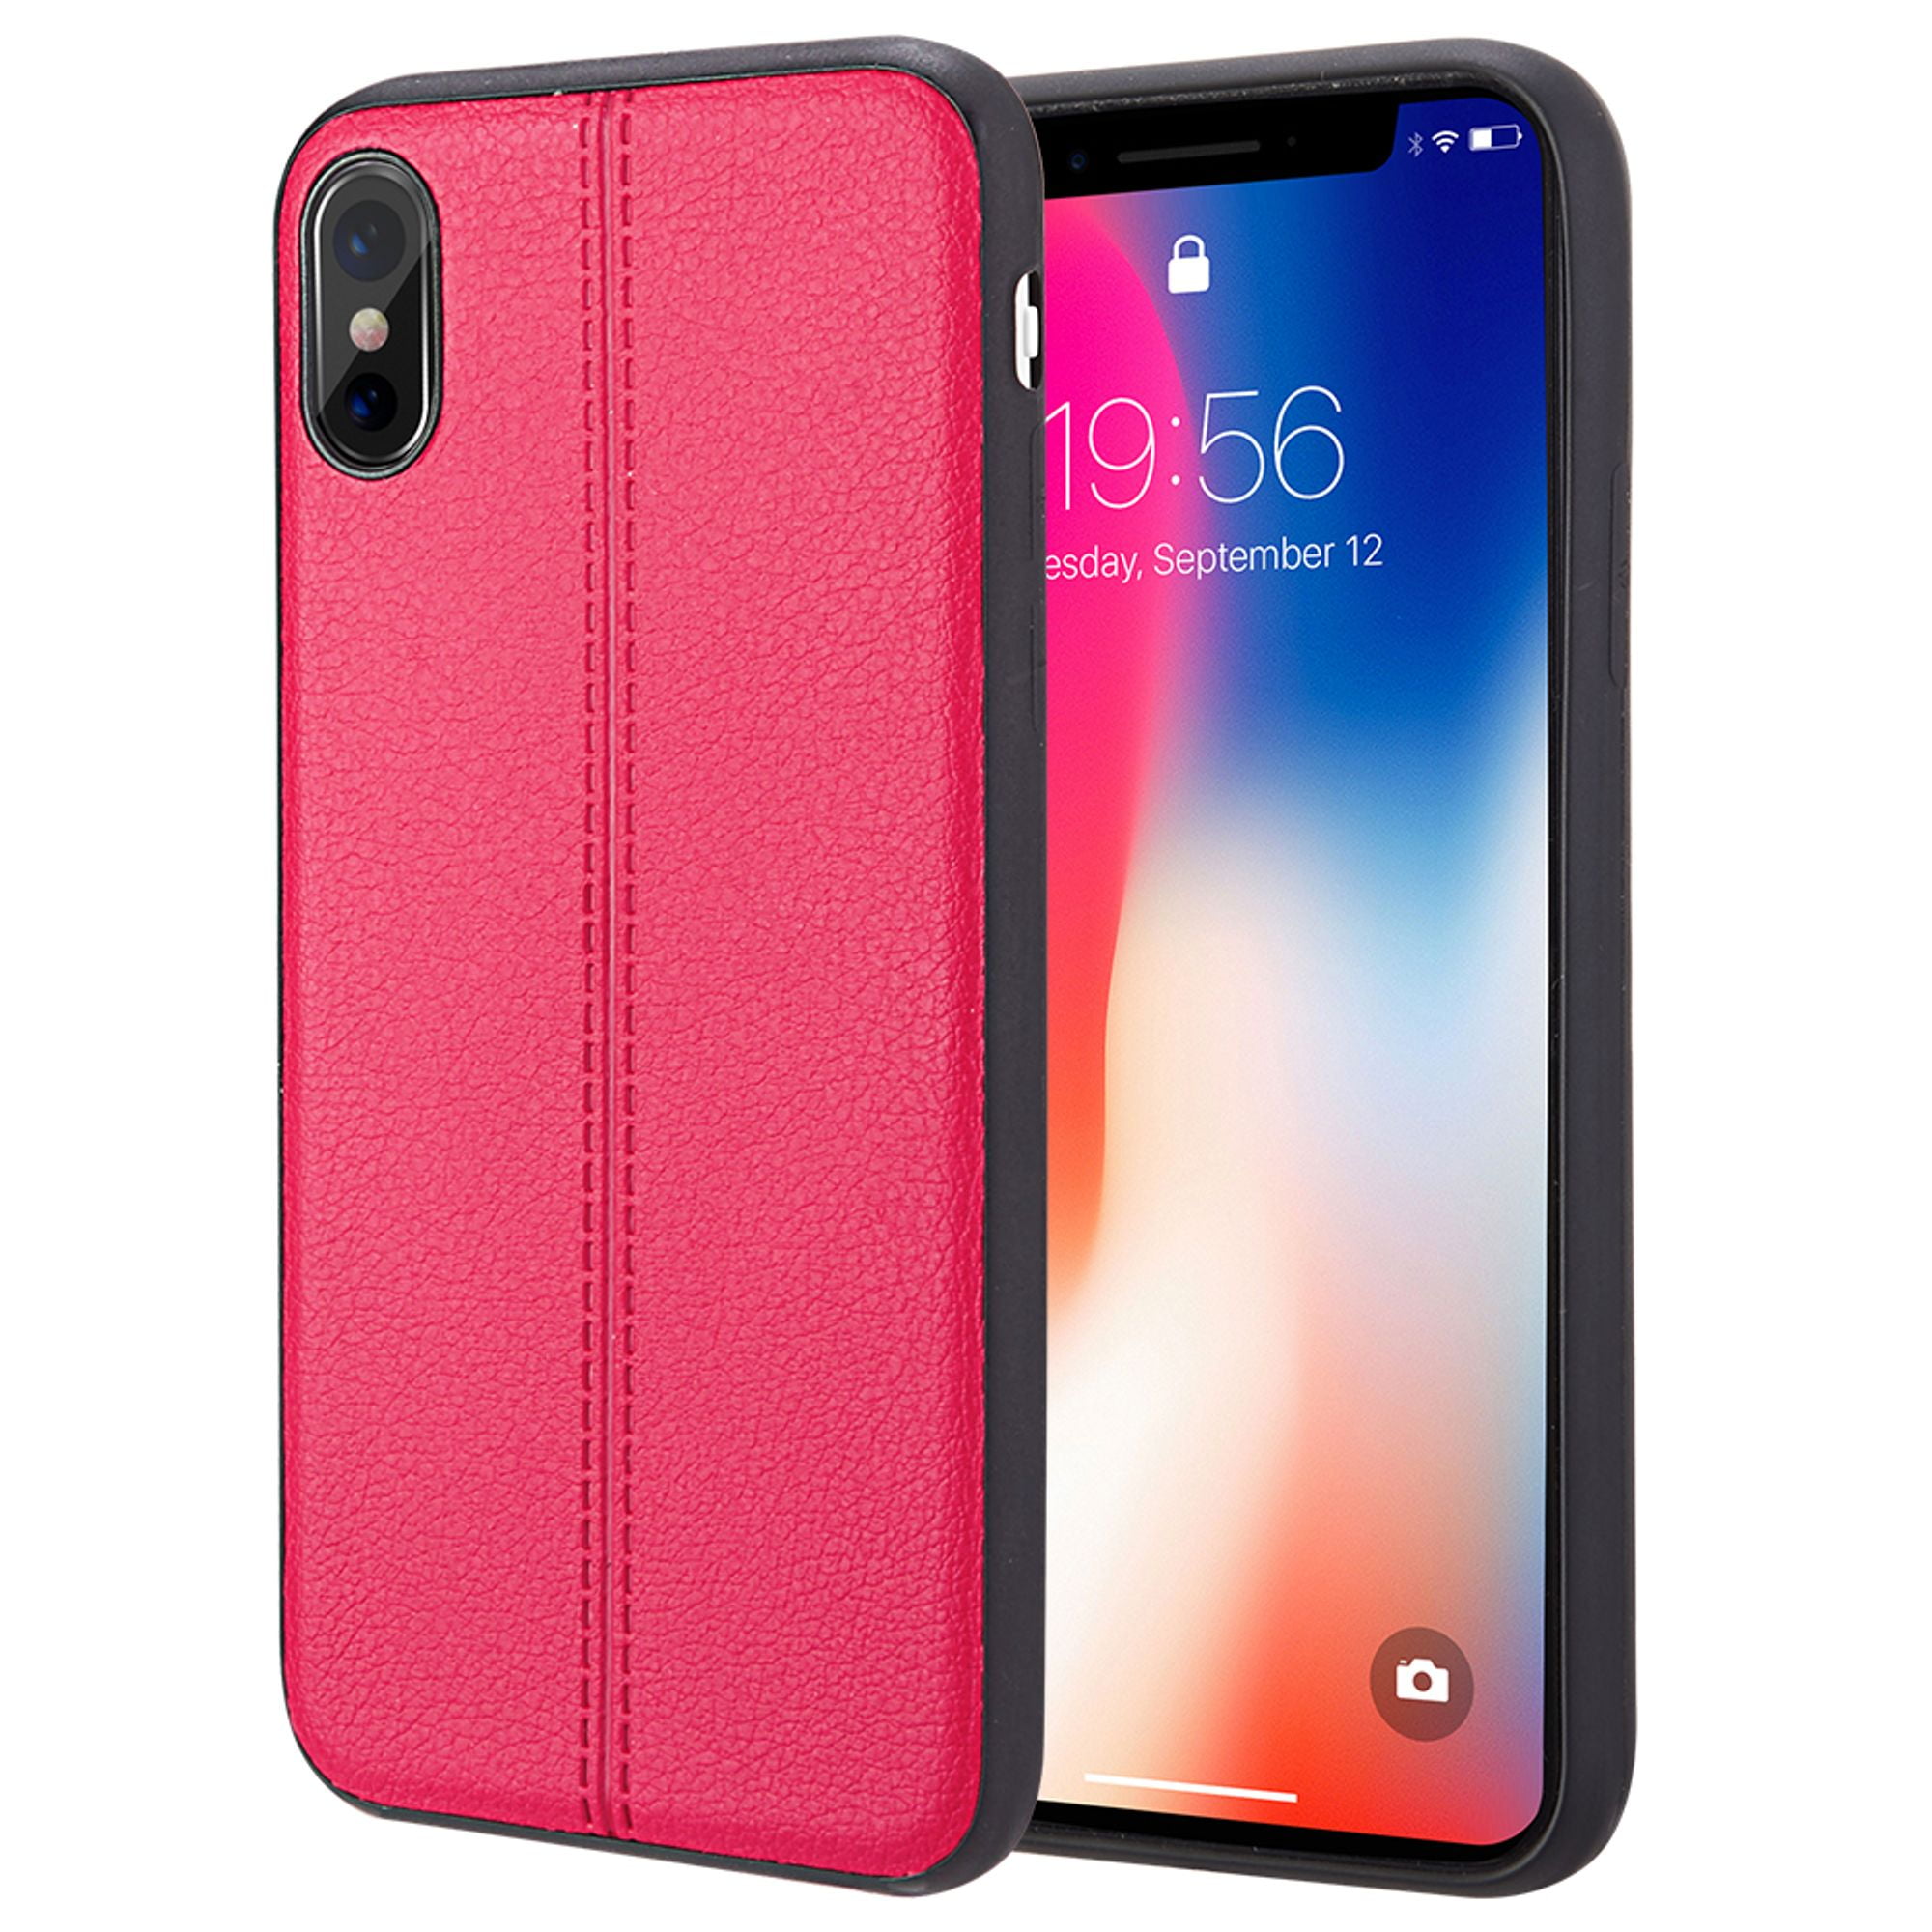 CSIPX-LJK-RD iPhone XS & X Leather Jacket TPU with PU Back Cover Case - Red -  Dream Wireless